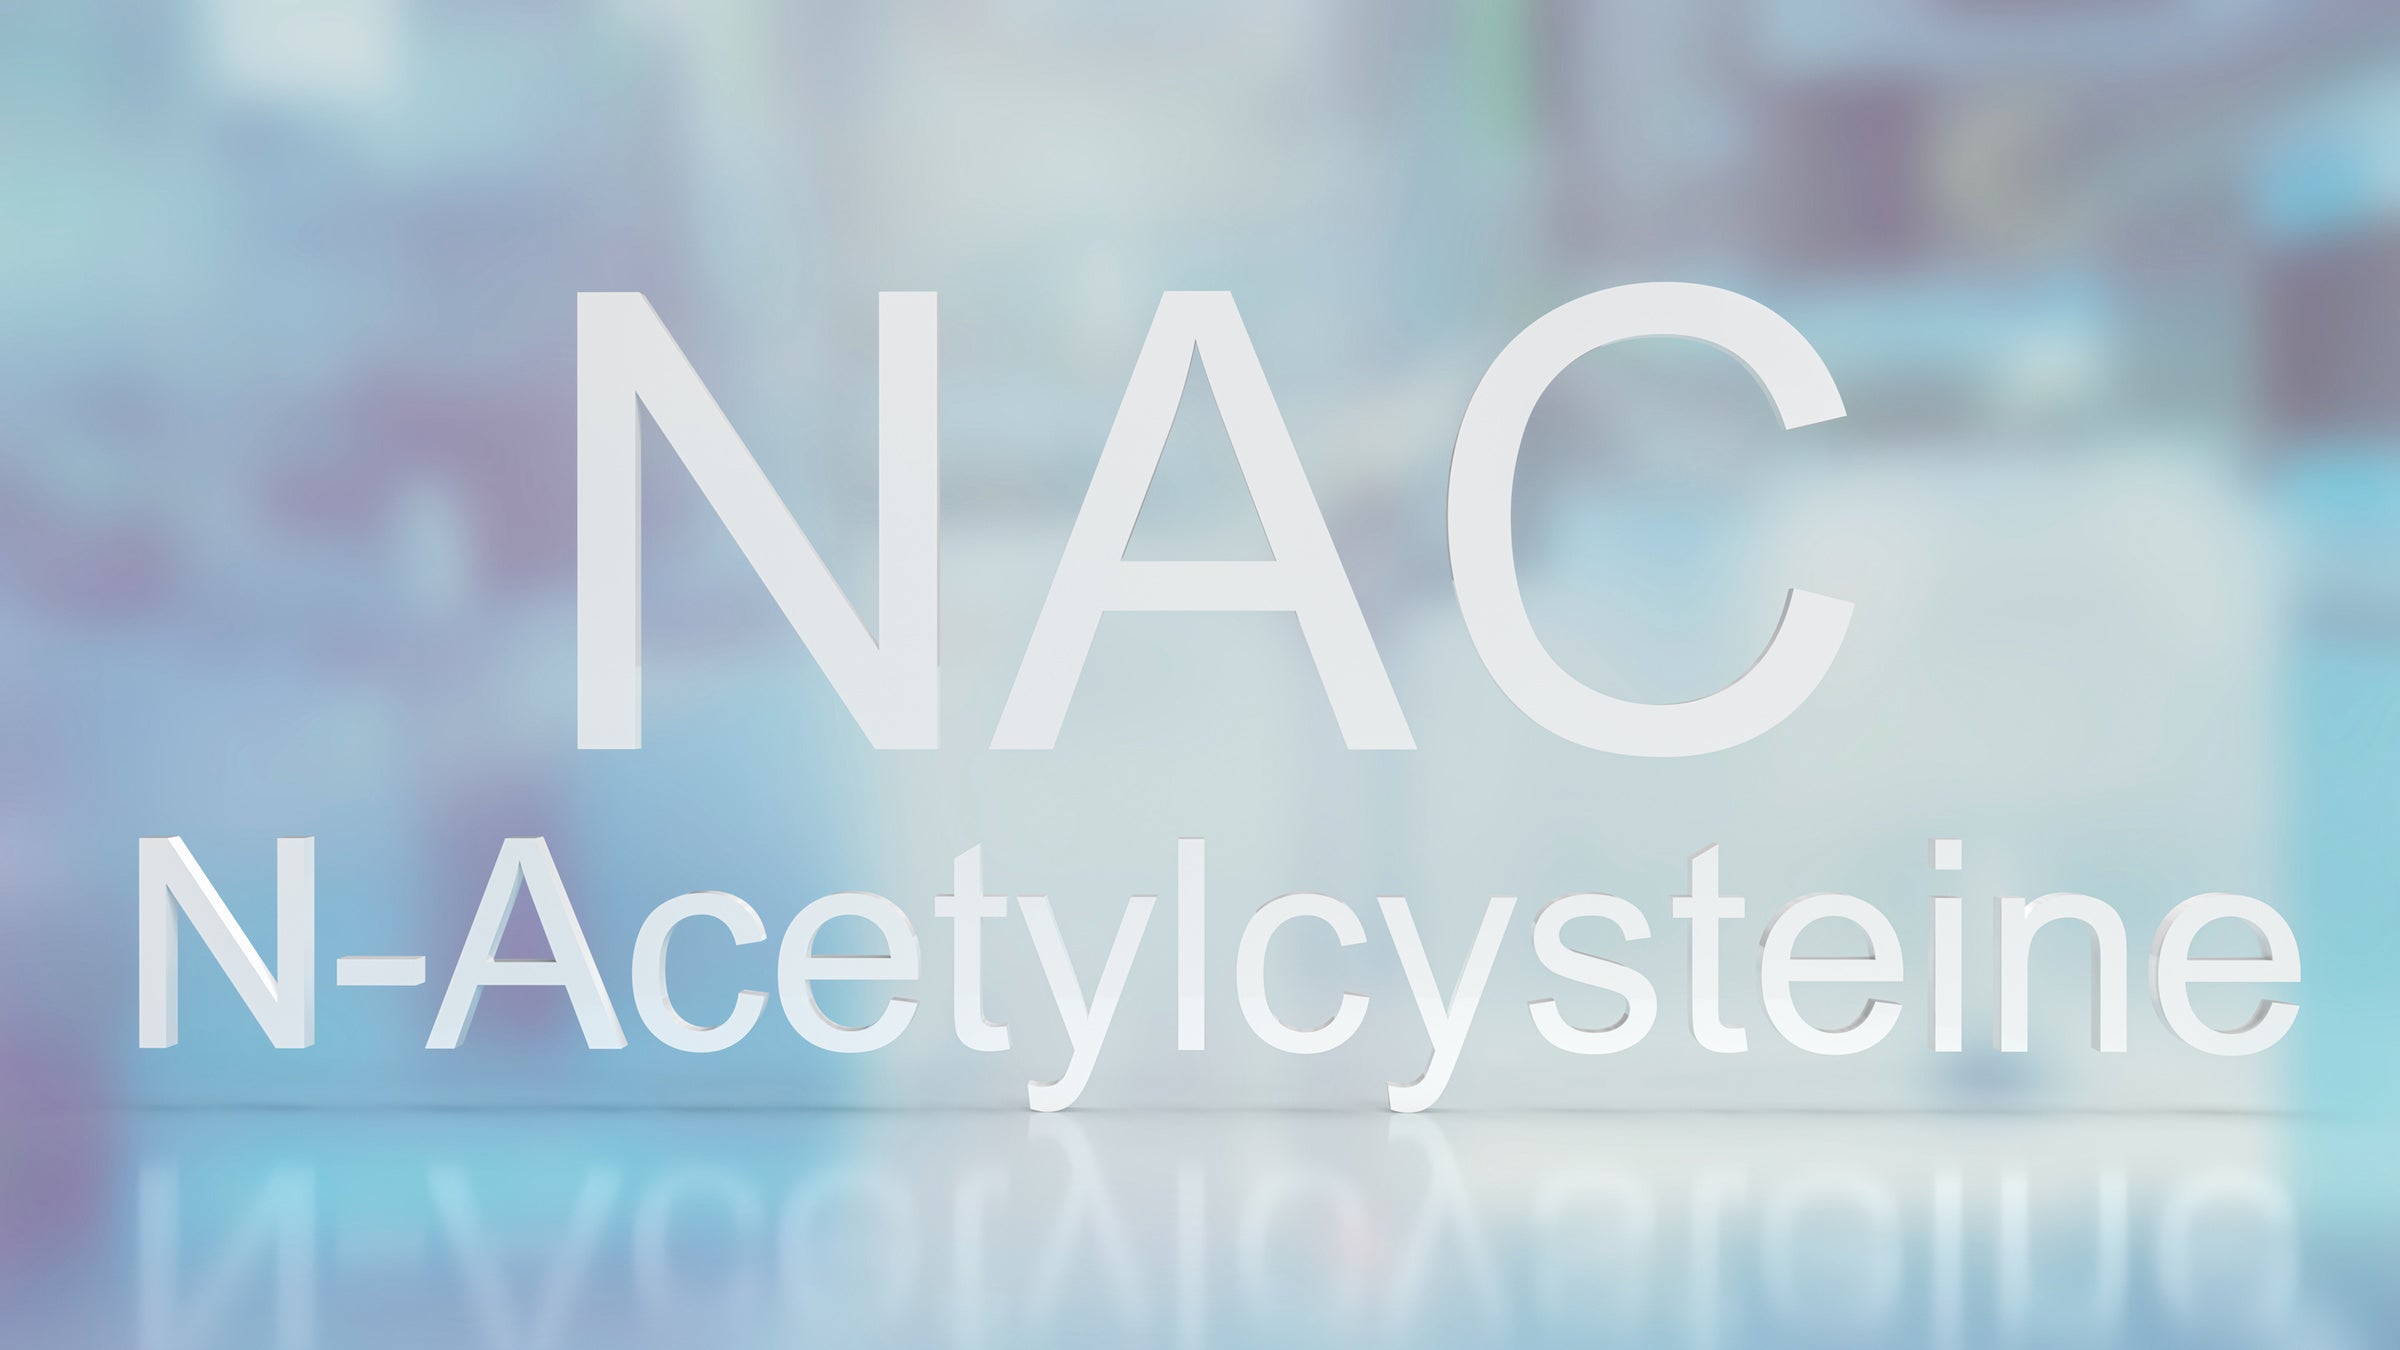 N-Acetyl-L-Cysteine: The Powerful Antioxidant and Respiratory Support